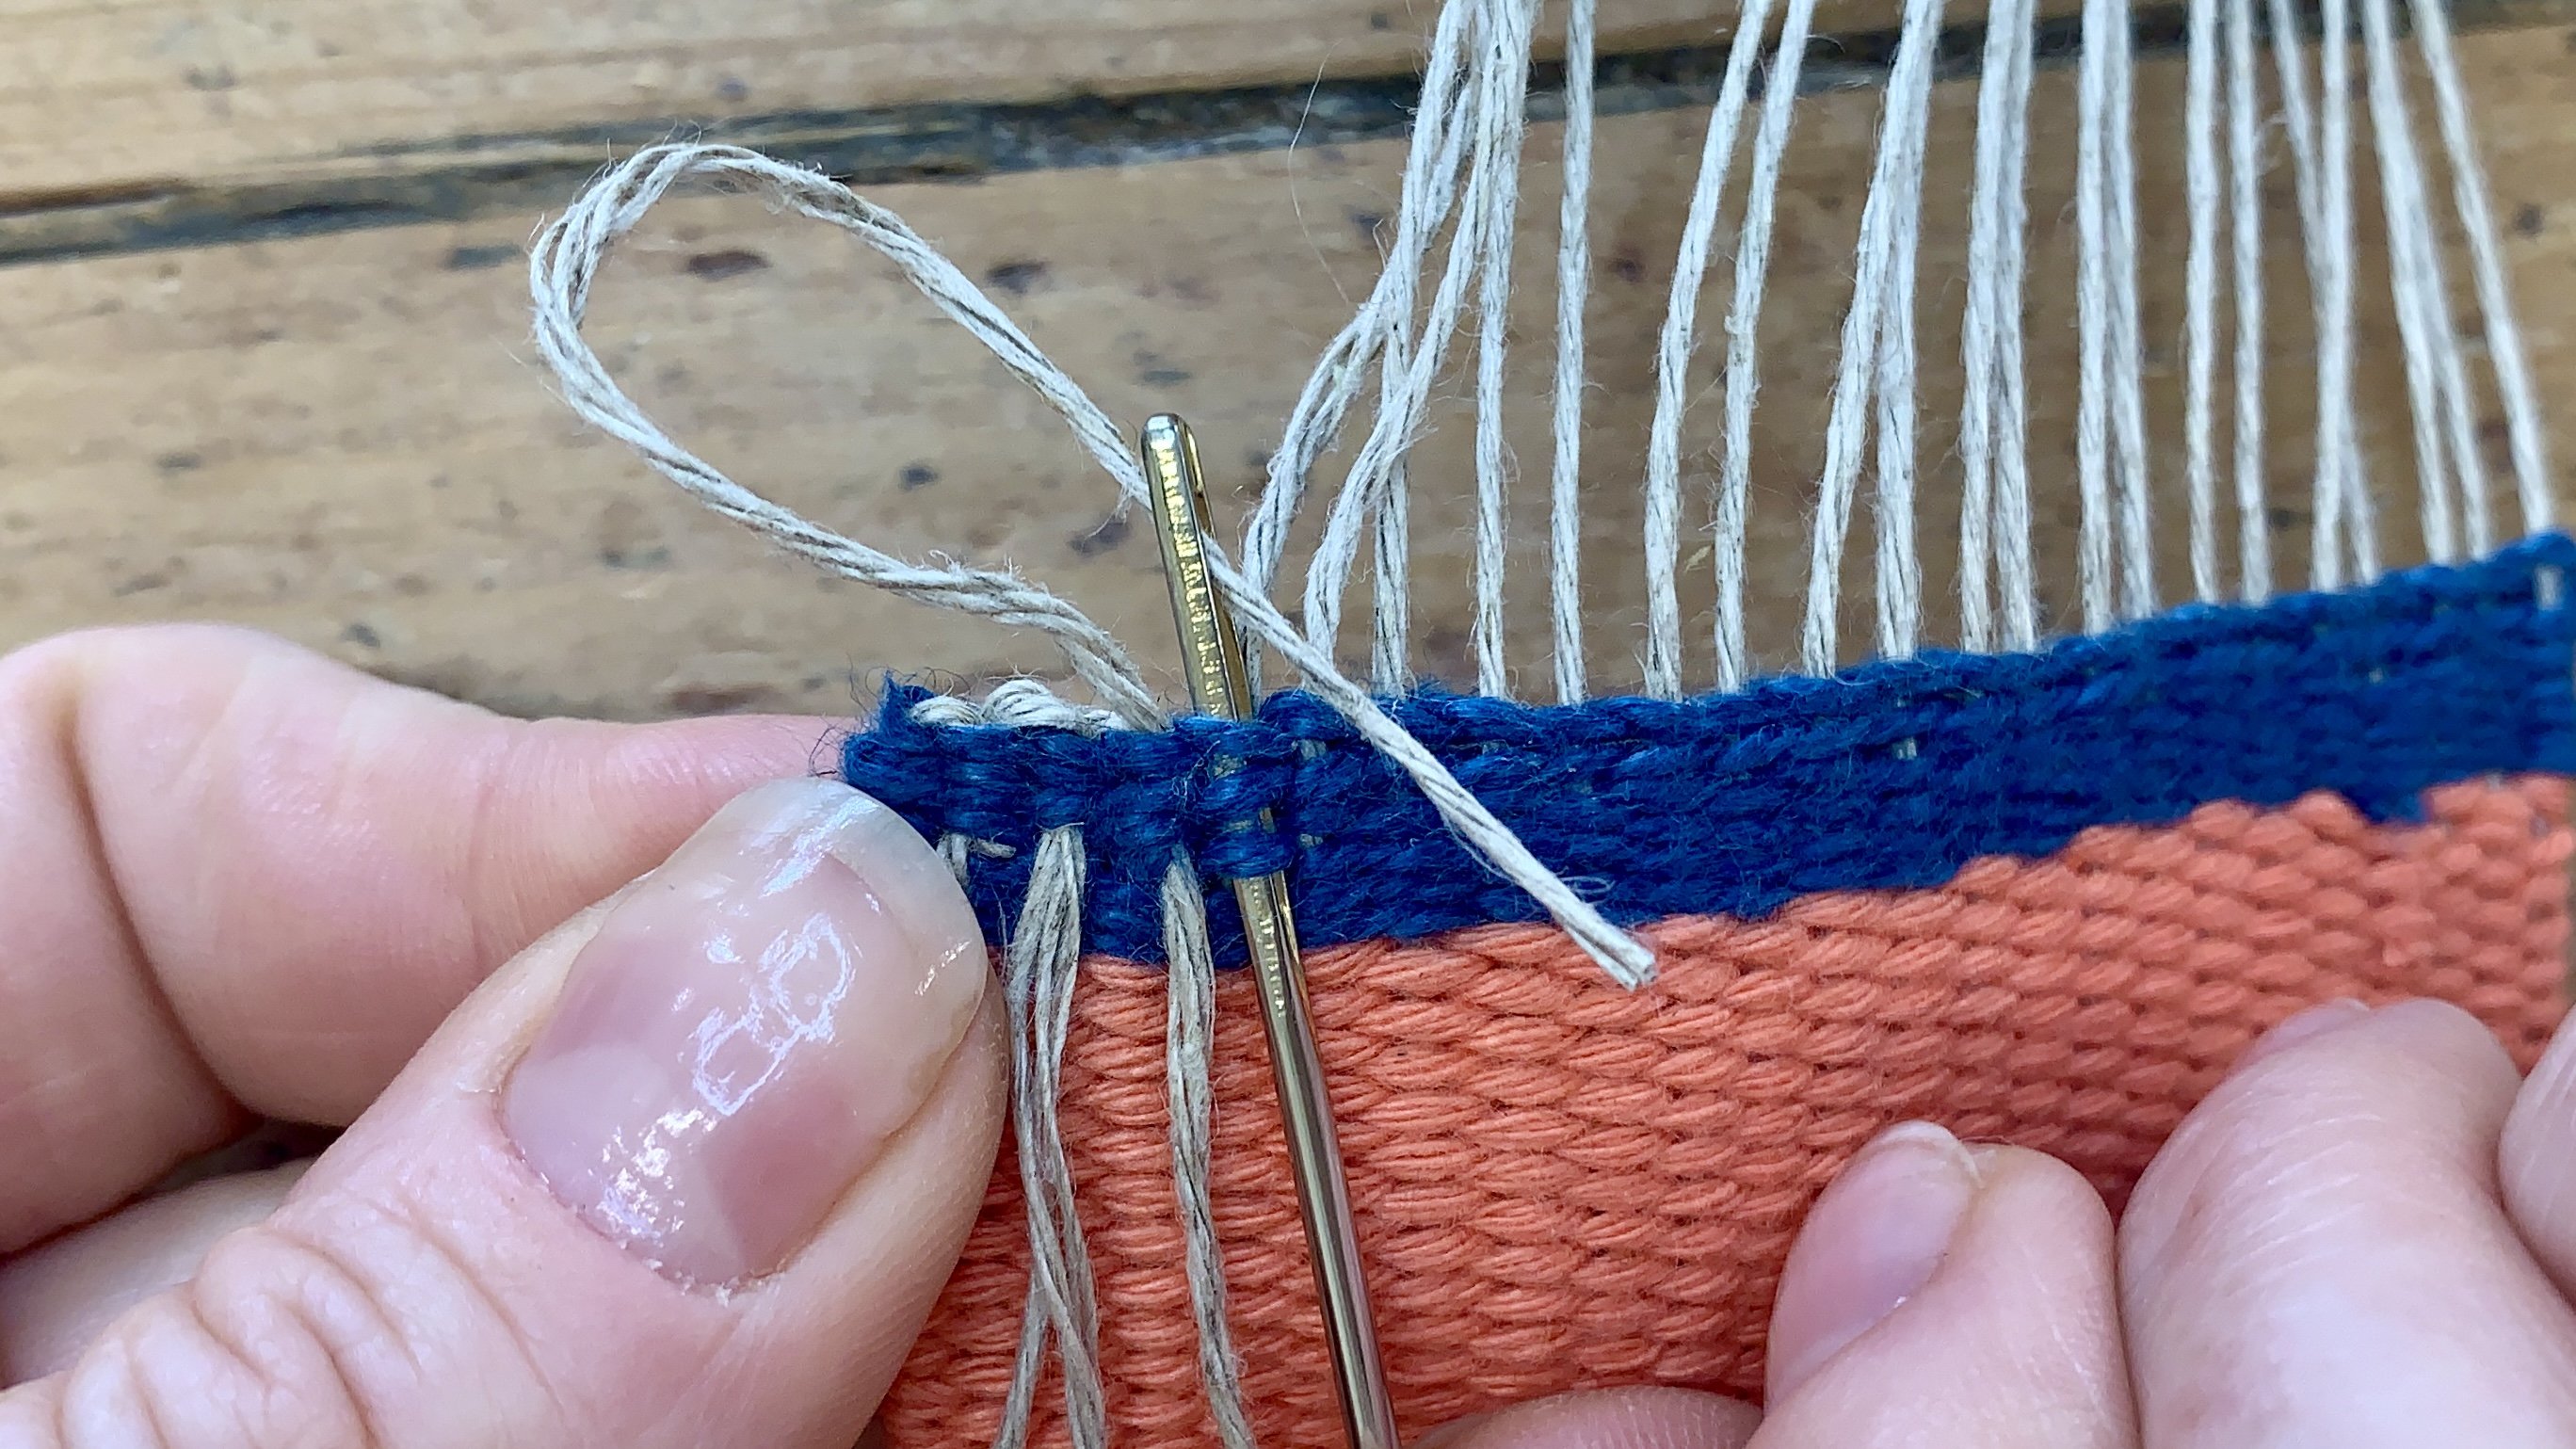 Frame Loom Weaving - A Comprehensive Guide to Becoming a Weaver